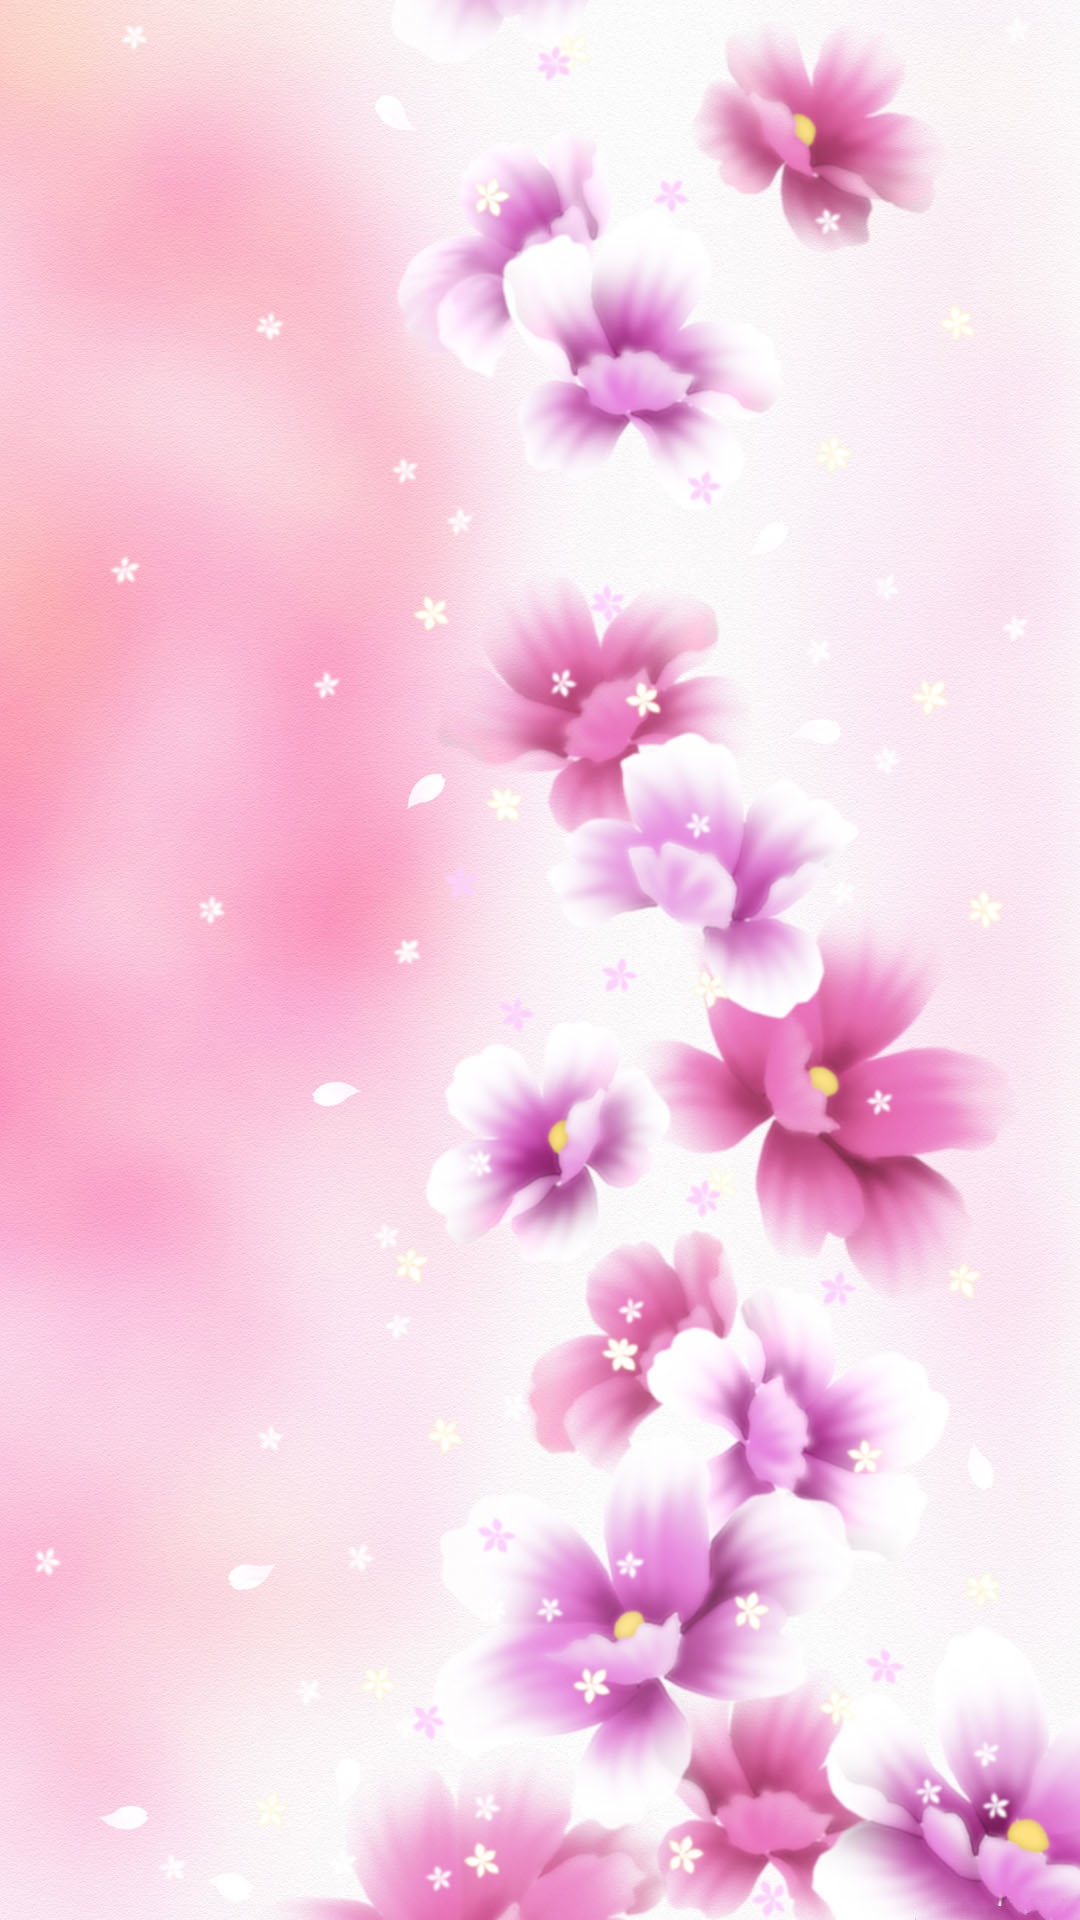 45+ Girly Wallpapers for Cell Phones on WallpaperSafari